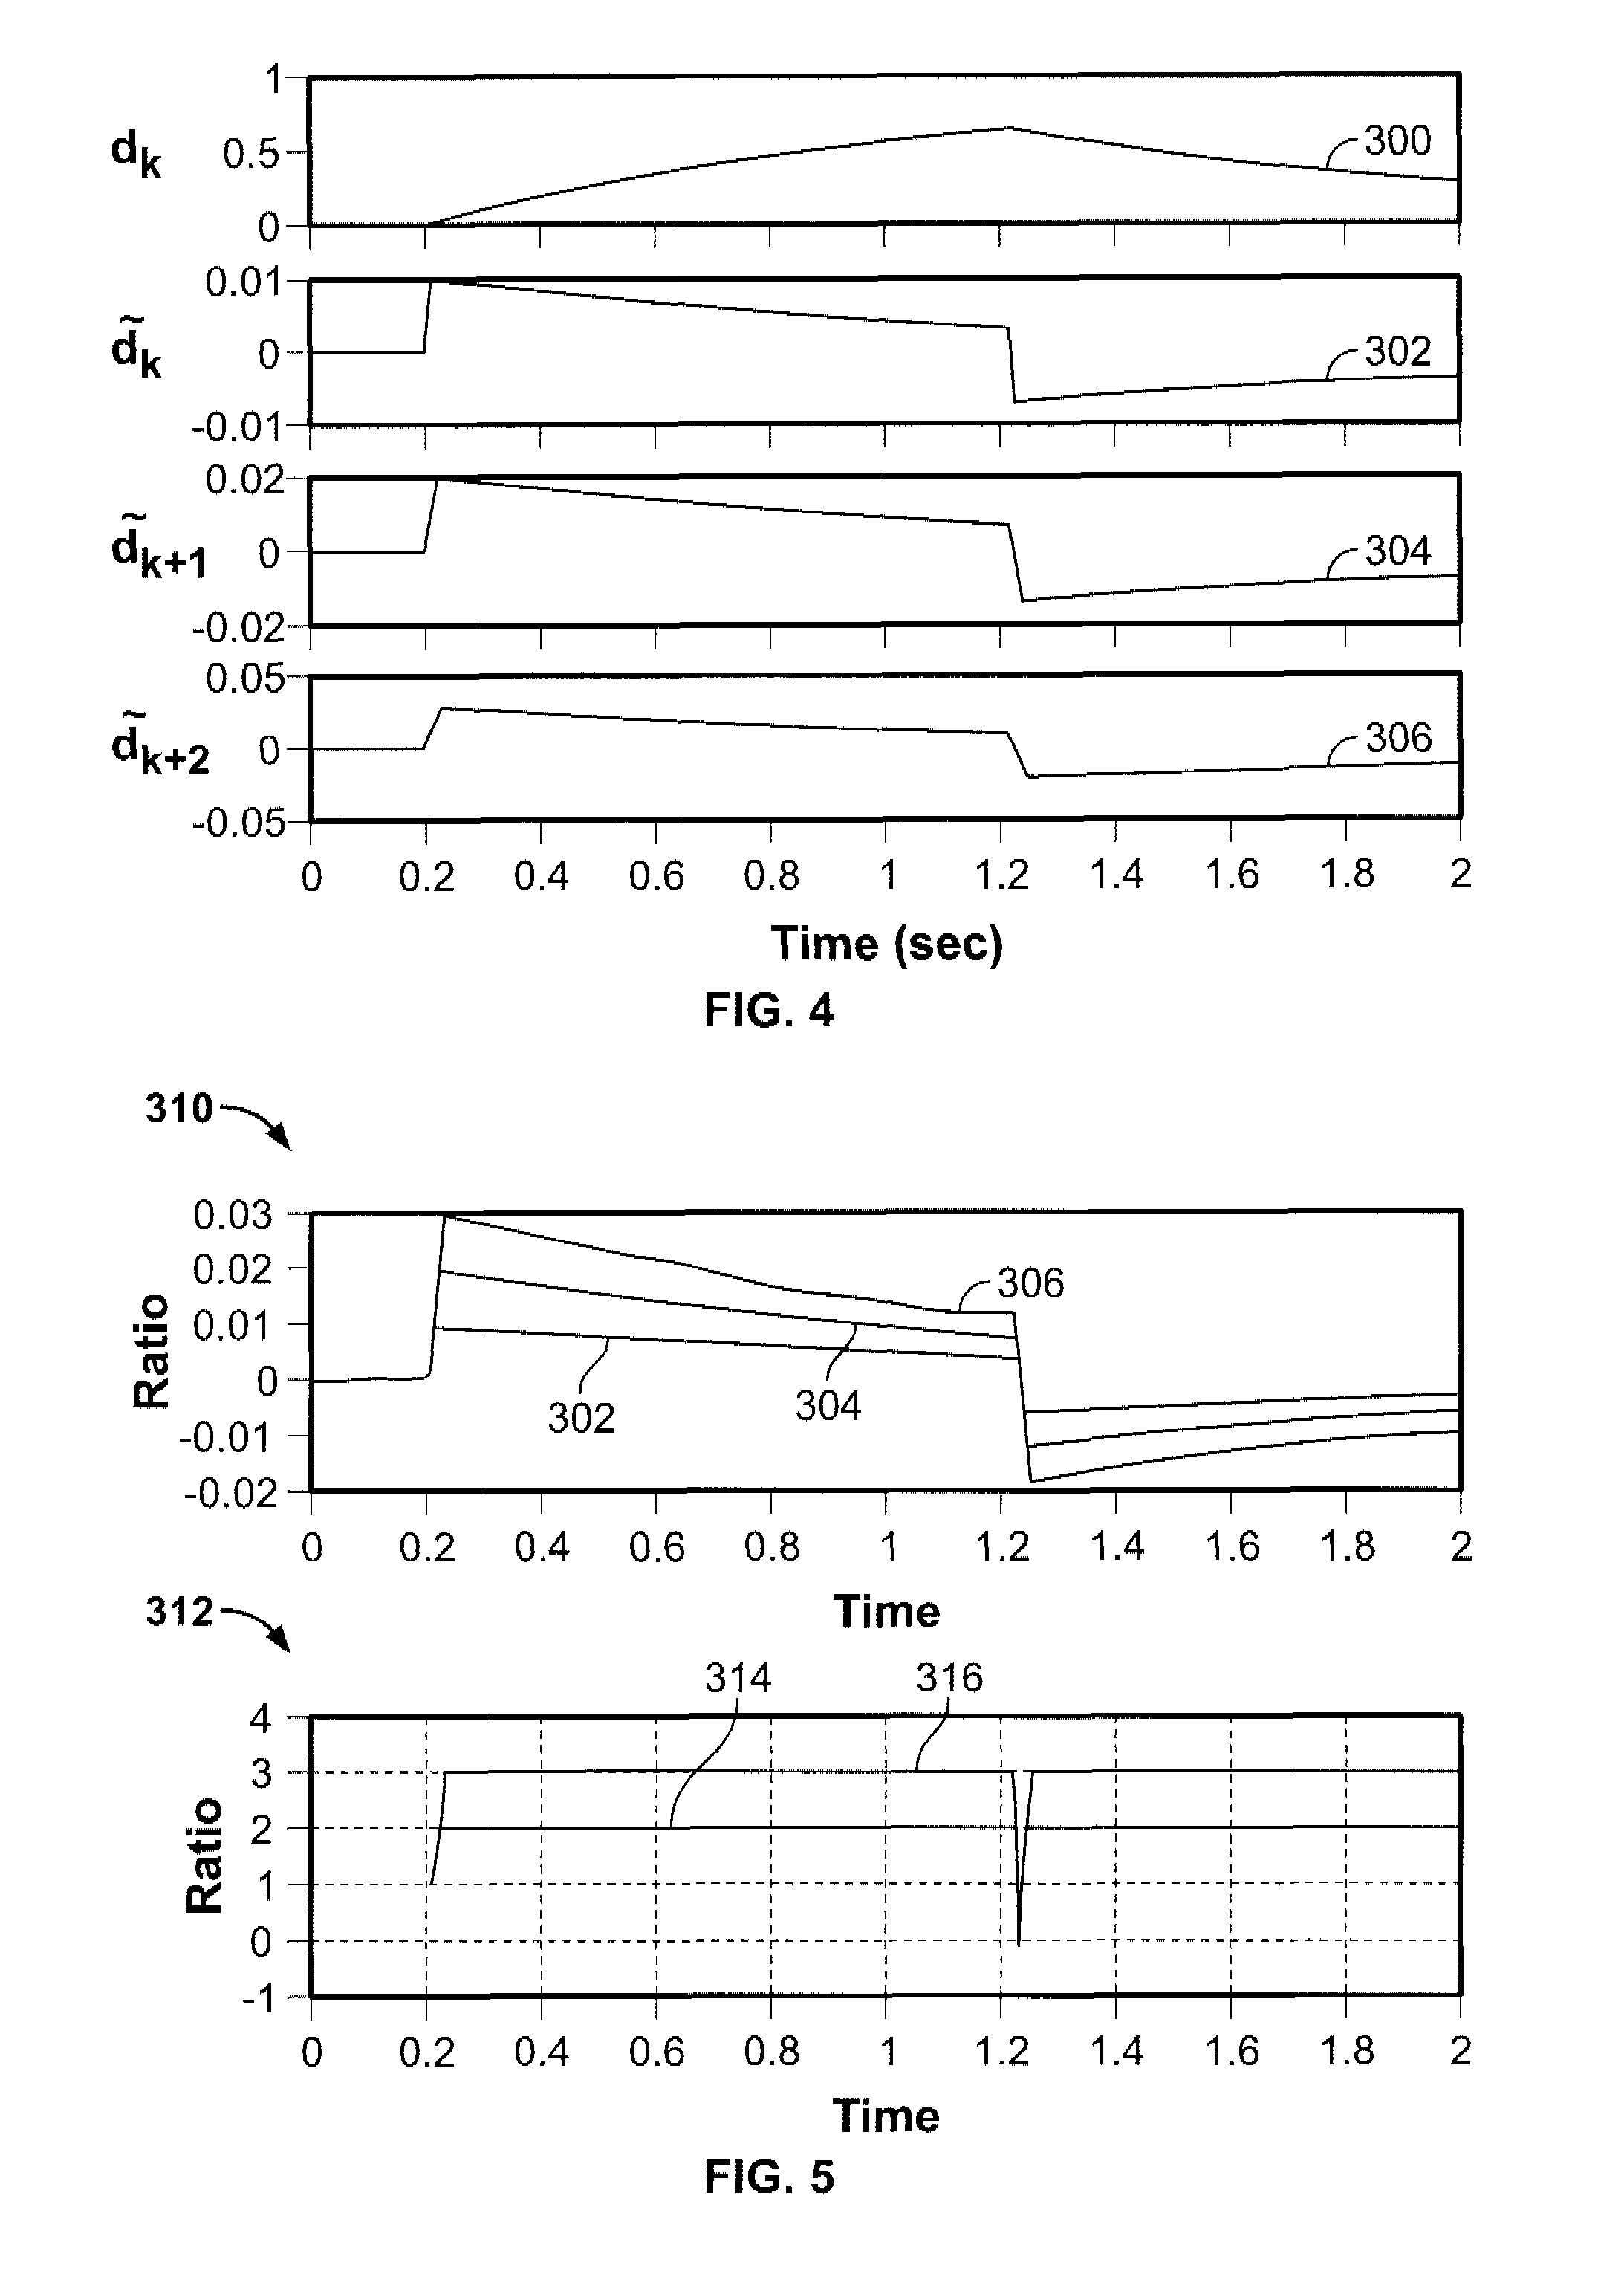 Systems and methods for reducing an effect of a disturbance